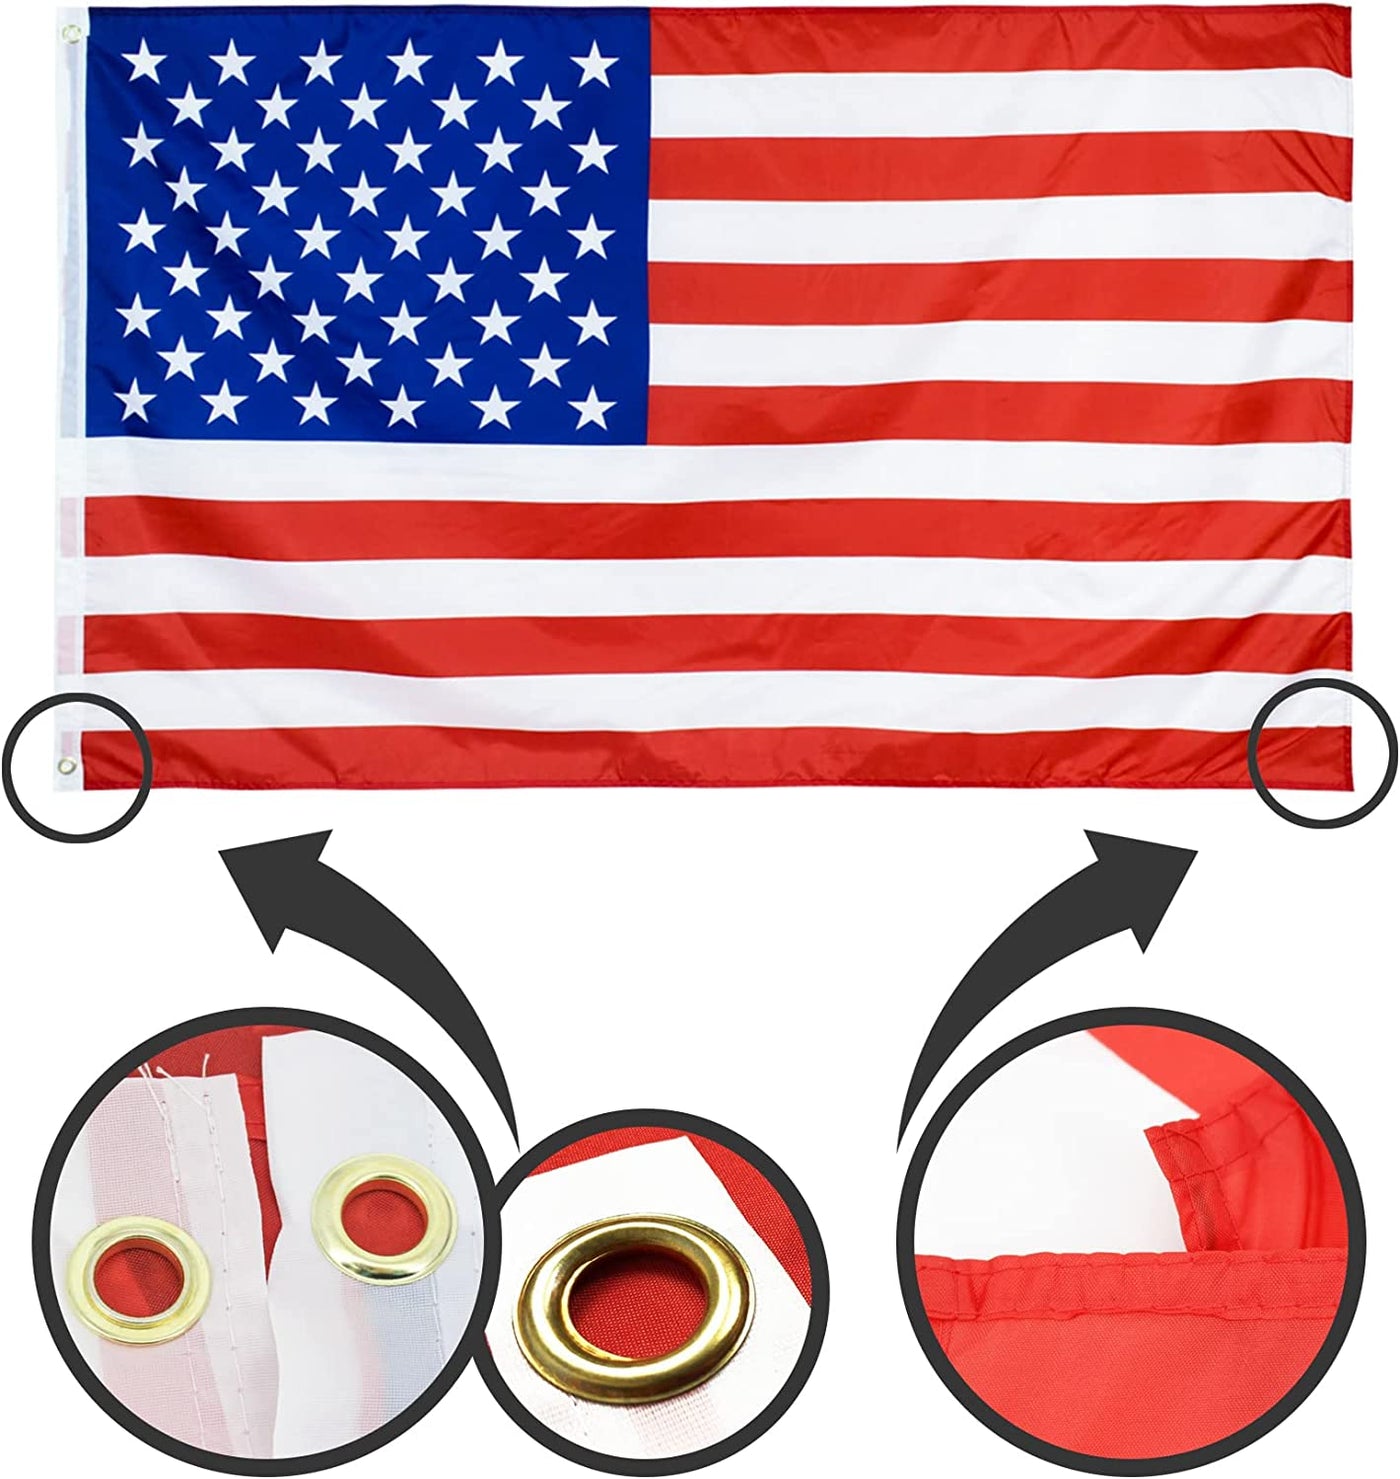 2 Pcs US American Flag 3x5 Foot | Flag of USA | Weatherproof US Flags with Brass Grommets | Polyester USA National Flag for Outdoor Garden World Cup Party Celebration Decorations